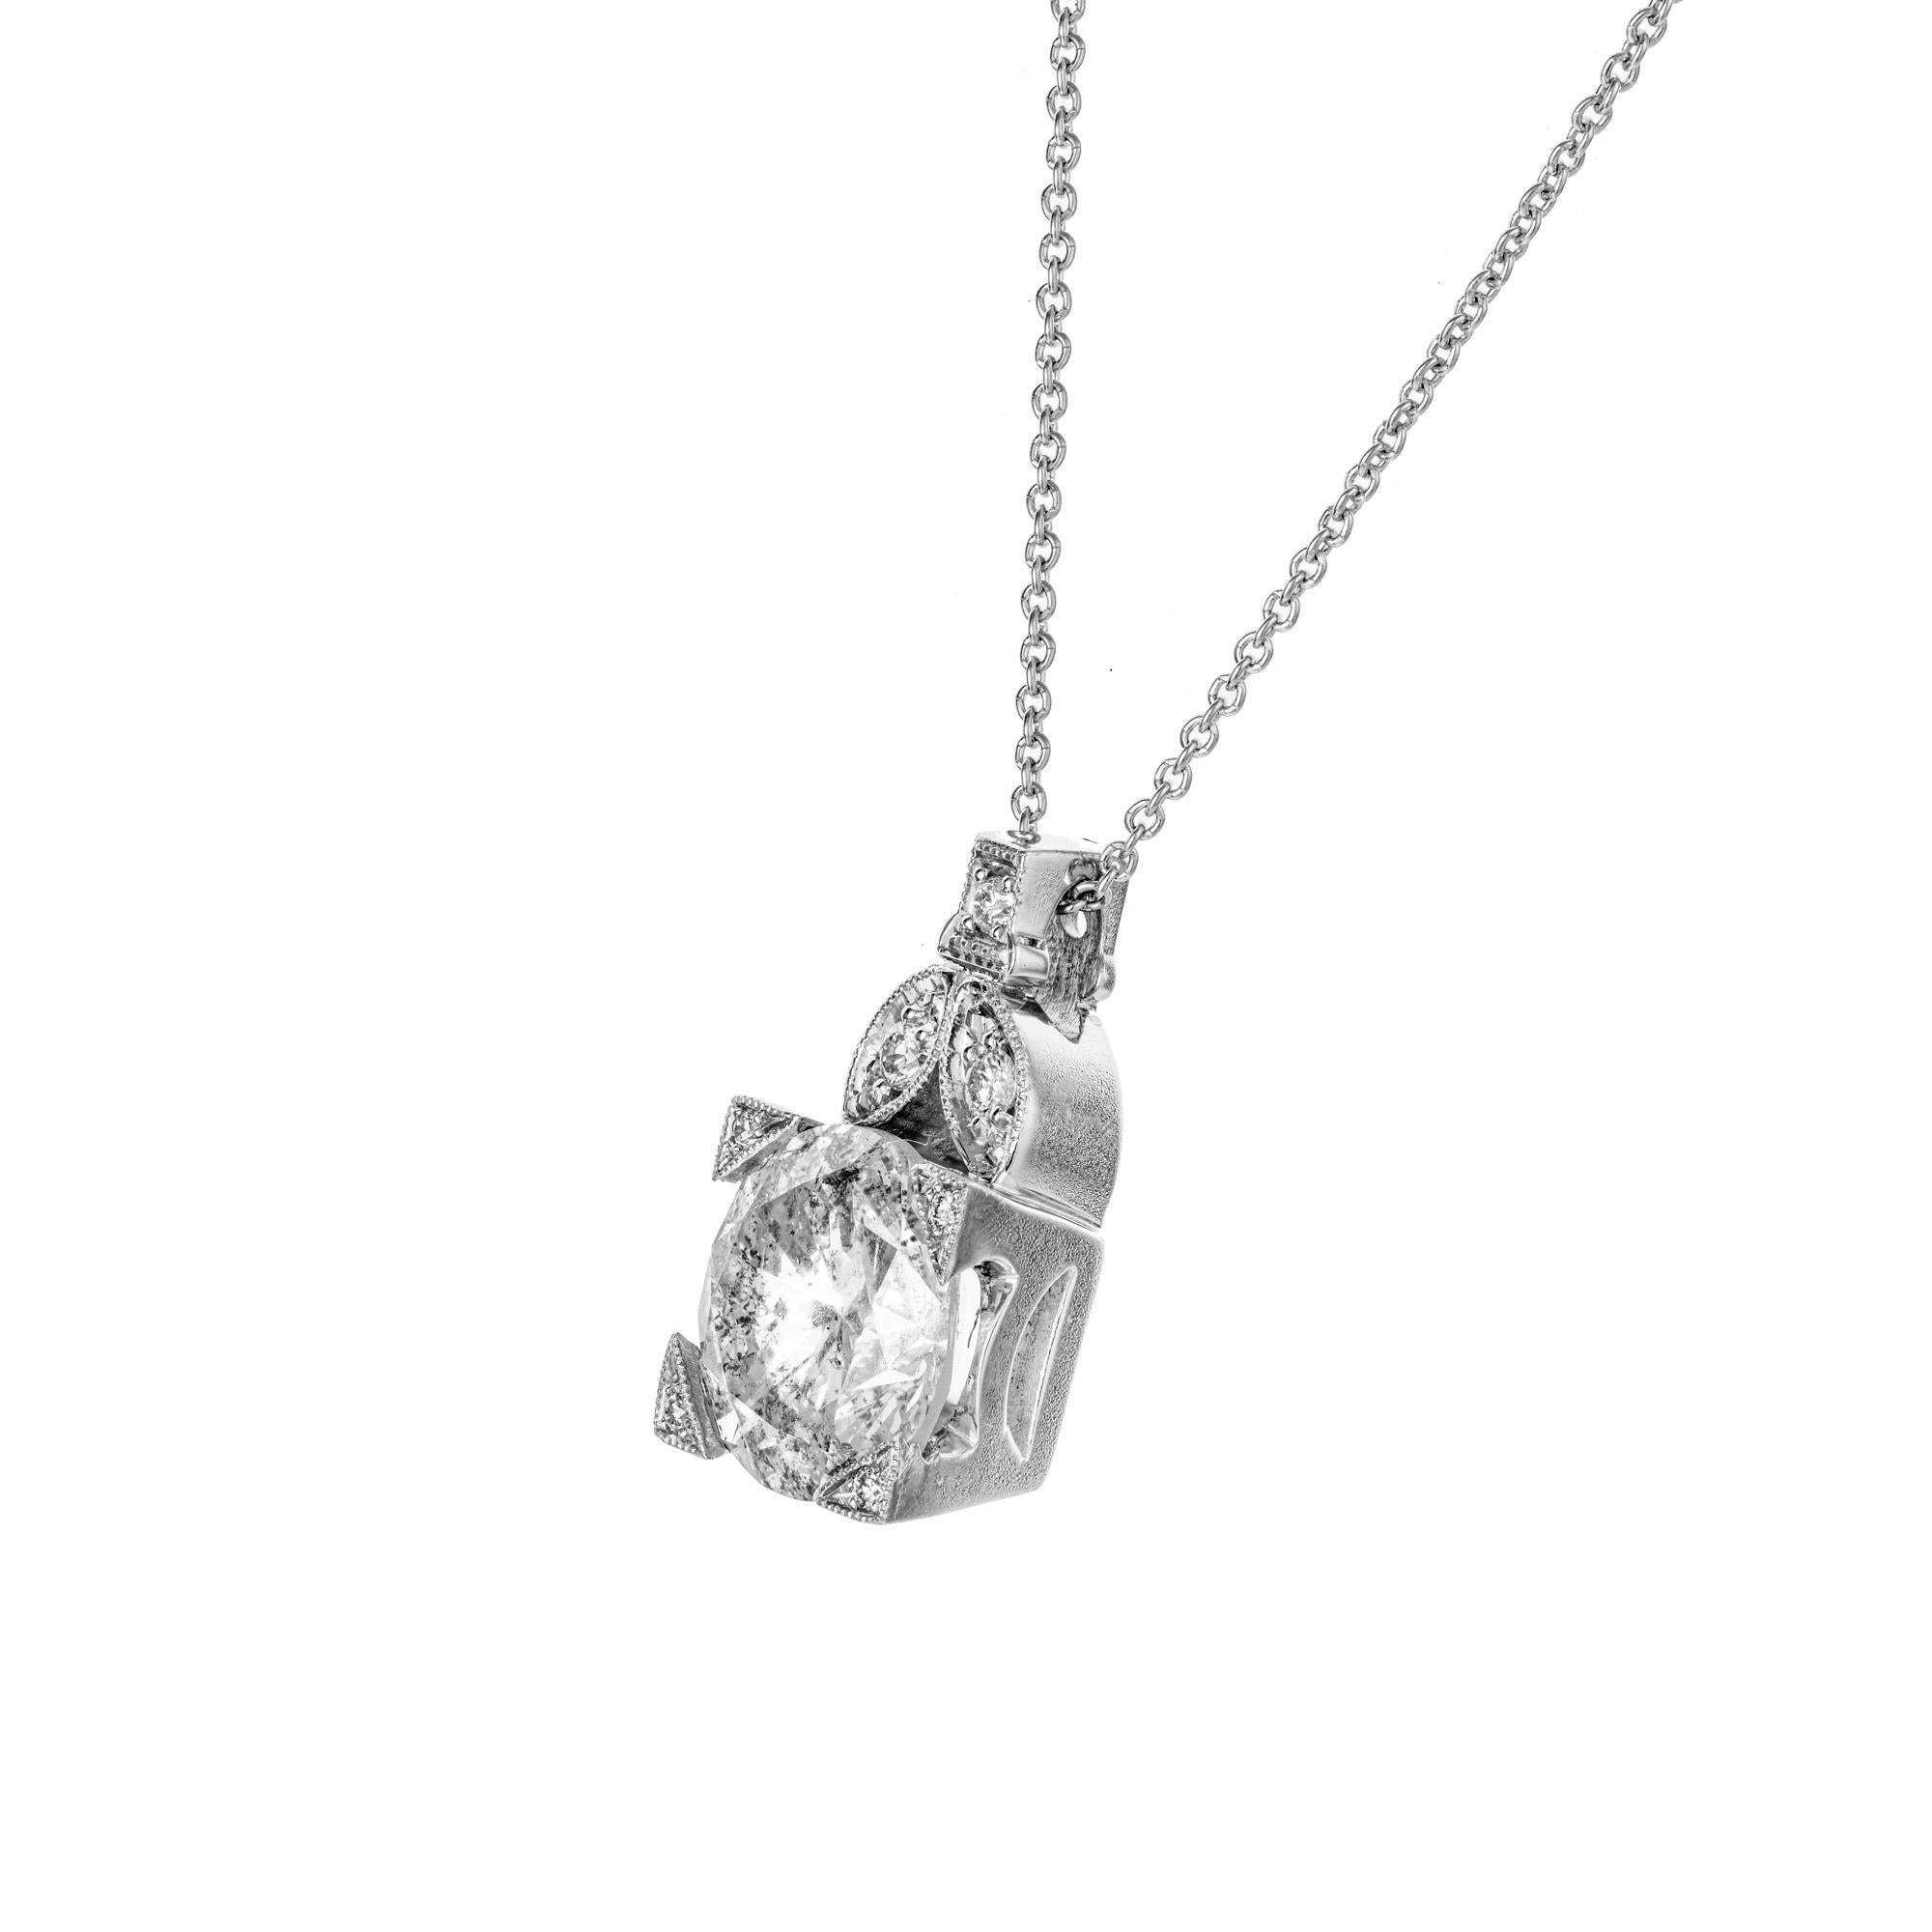 1930's Art Deco transitional cut diamond pendant necklace. EGL certified center stone set in platinum with 7 round cut accent diamonds on a platinum 18.50 inch chain. 

1 Transitional cut, approx. total weight 2.44ct, E to F color and I1 Clarity.